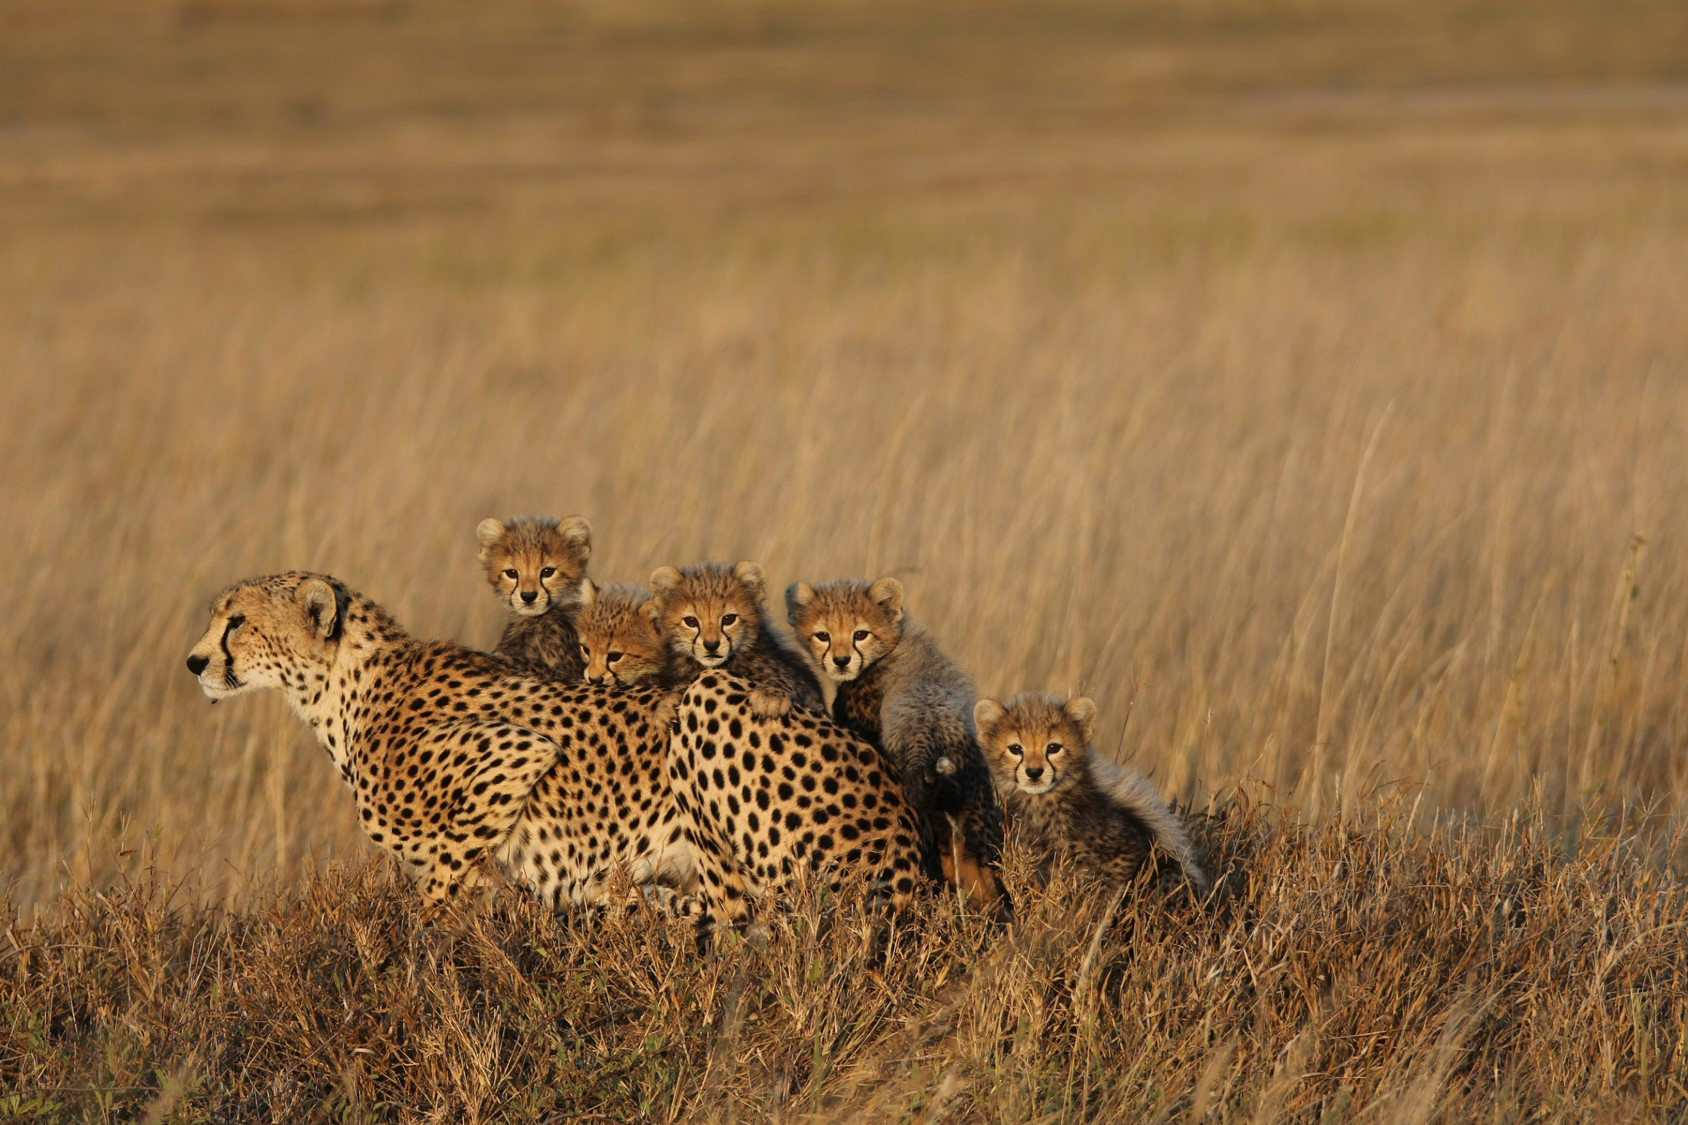 An adult cheetah with five cubs in a grass-covered plain.